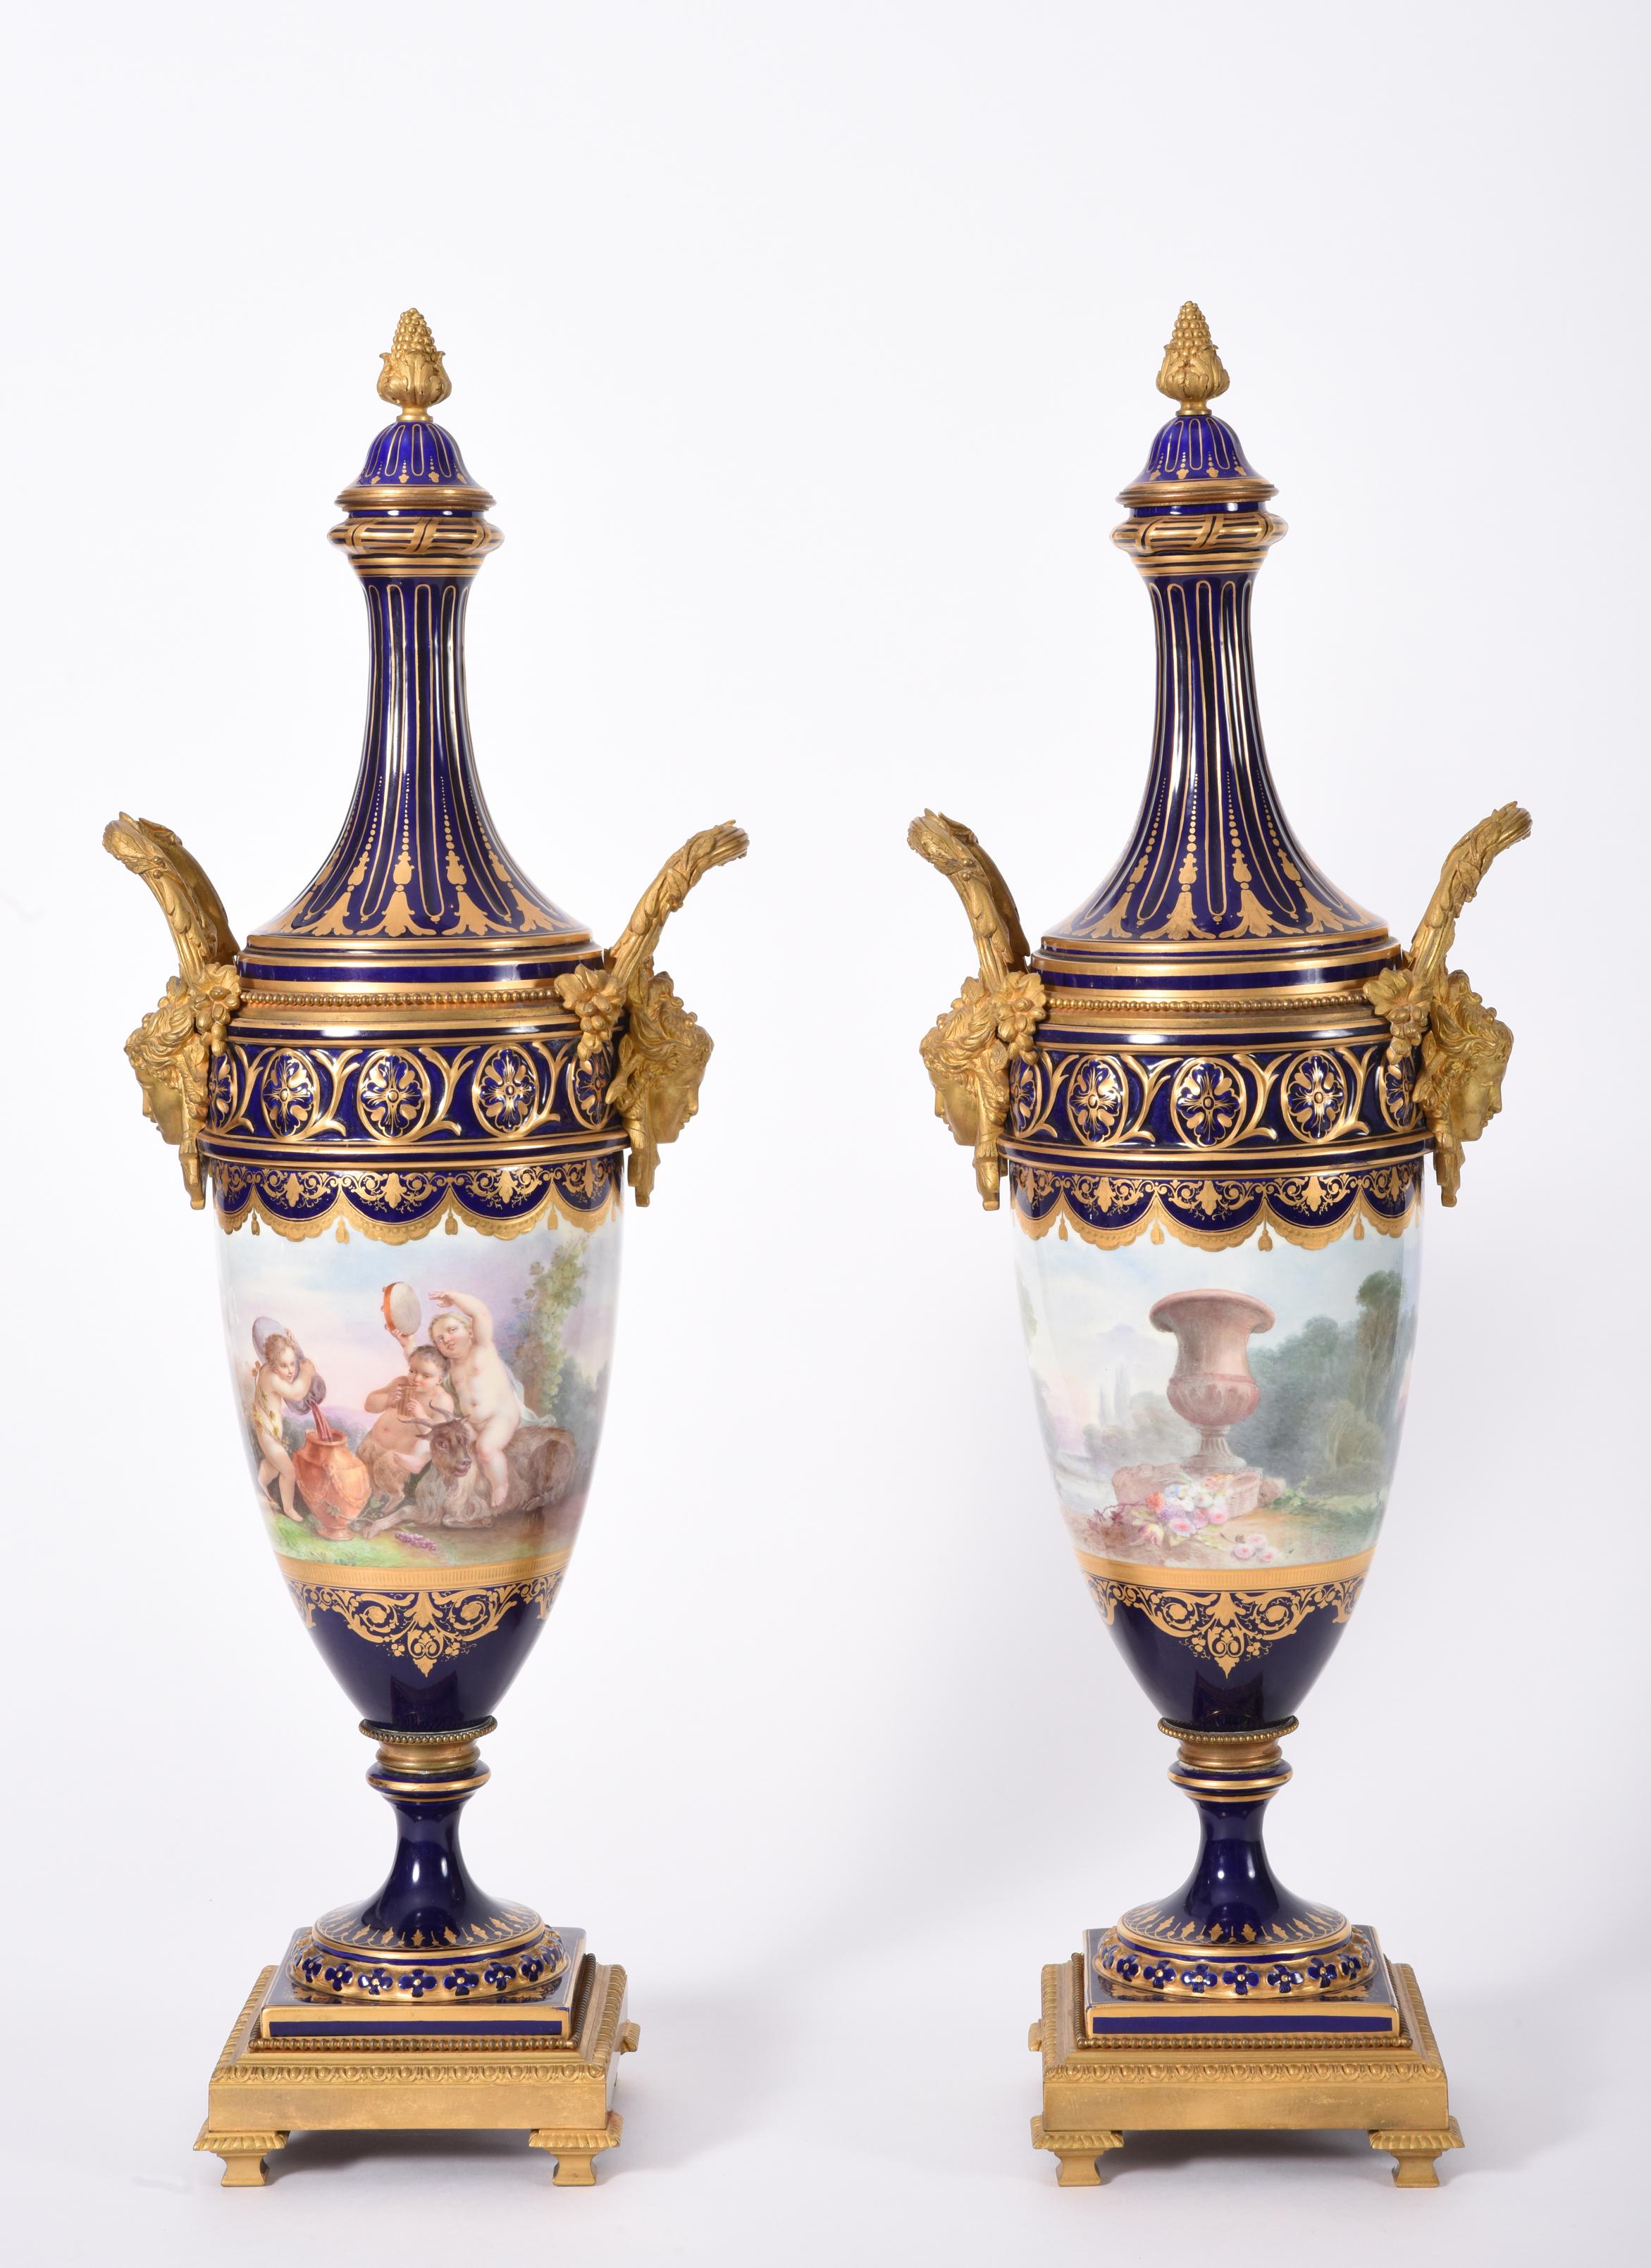 Early 19th century matching pair of Sèvres style gilt bronze mounted porcelain centerpiece urns. These superbly hand painted / decorated pieces are just exquisite and in excellent antique condition with minor wear consistent to age and use. Each urn